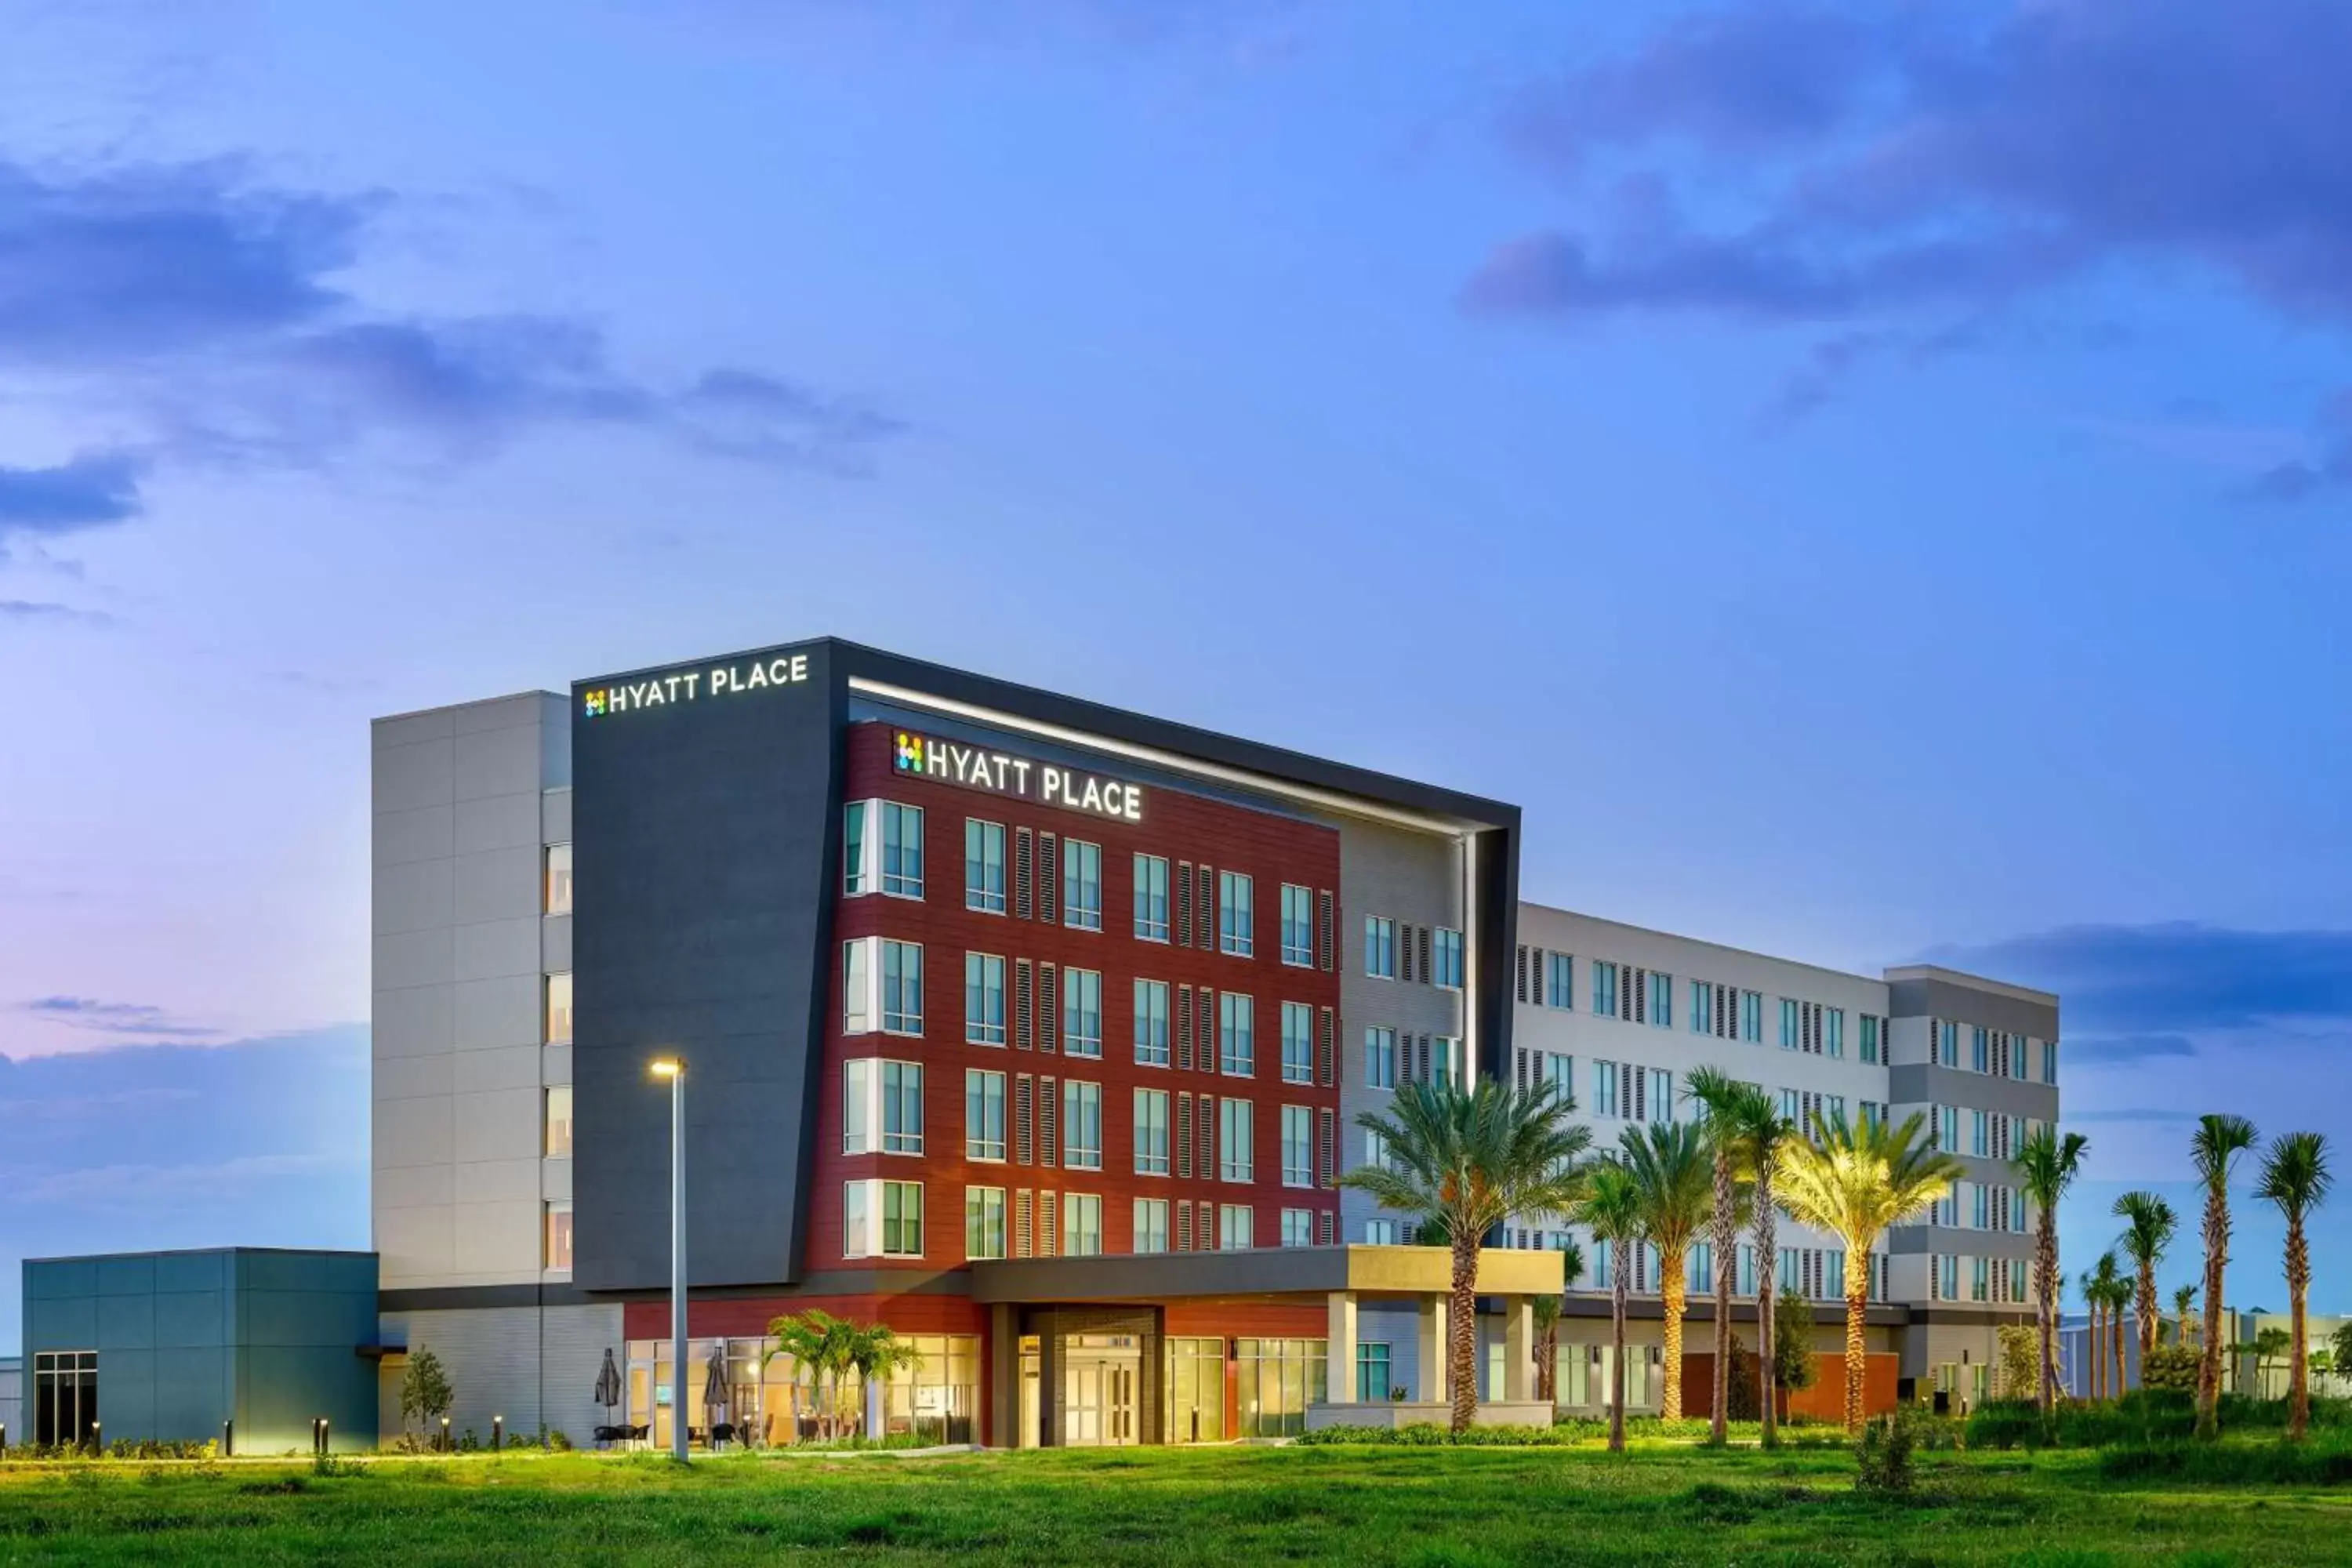 Property Building in Hyatt Place Melbourne Airport, Fl